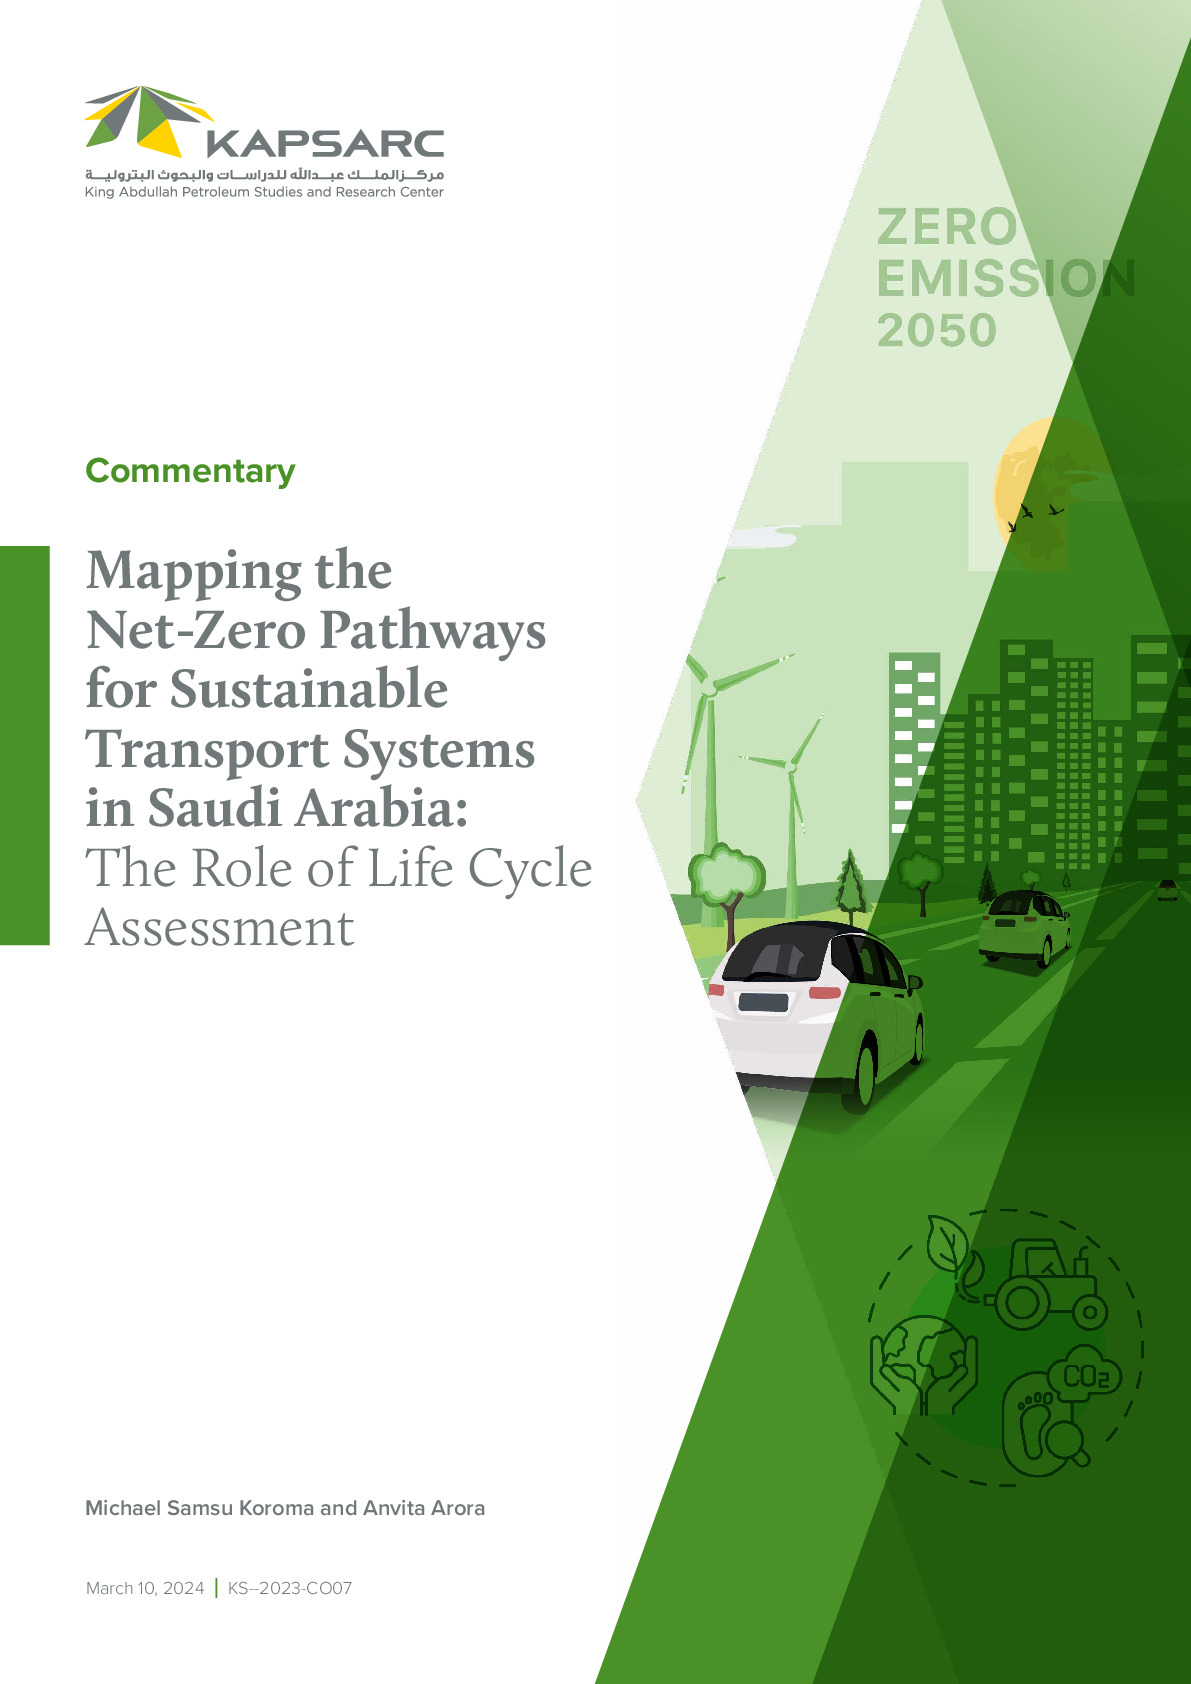 Mapping the Net-Zero Pathways for Sustainable Transport Systems in Saudi Arabia: The Role of Life Cycle Assessment